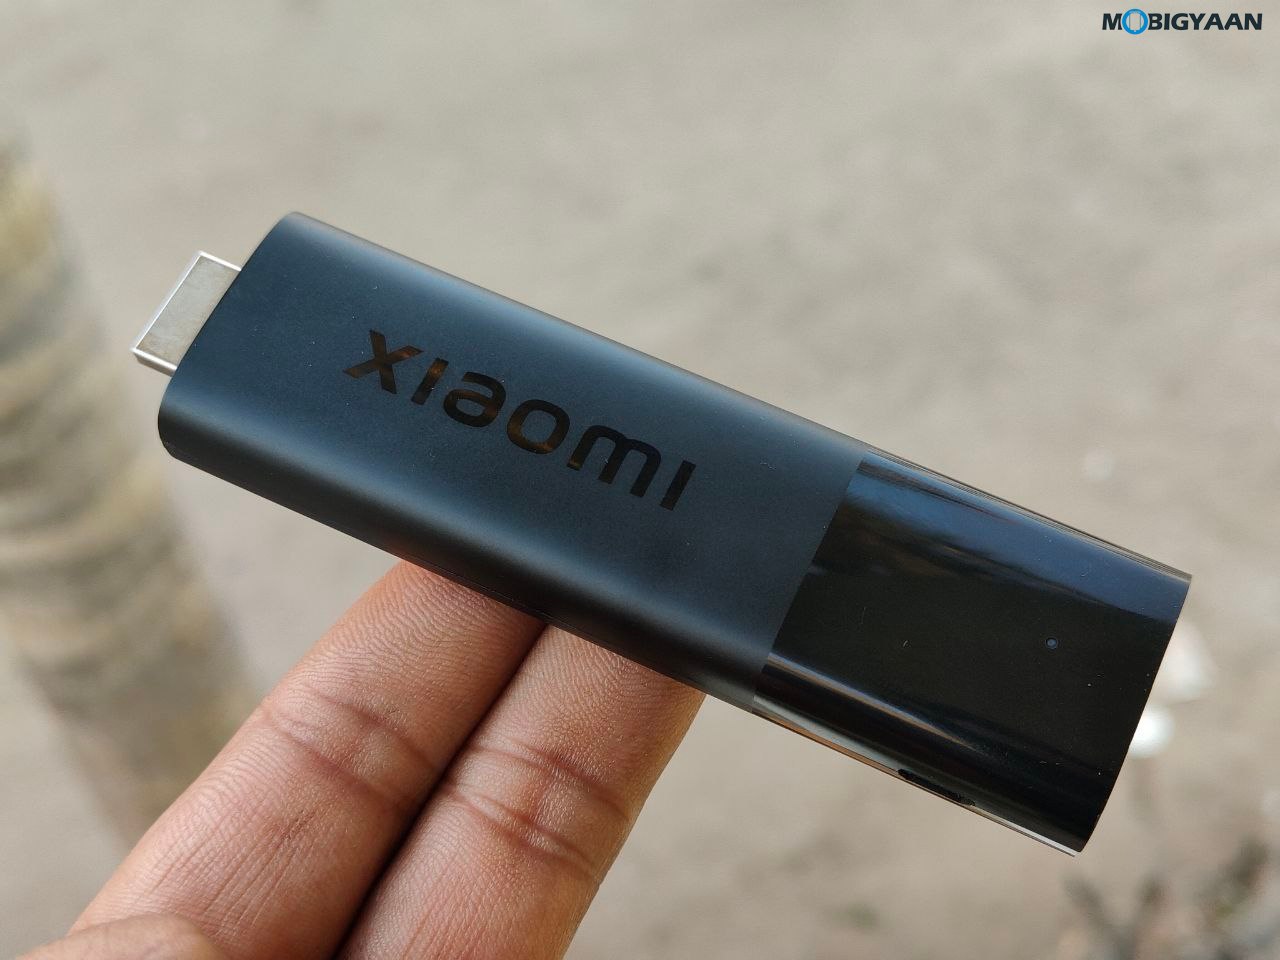 Xiaomi's Mi TV stick with Android TV has already been unboxed